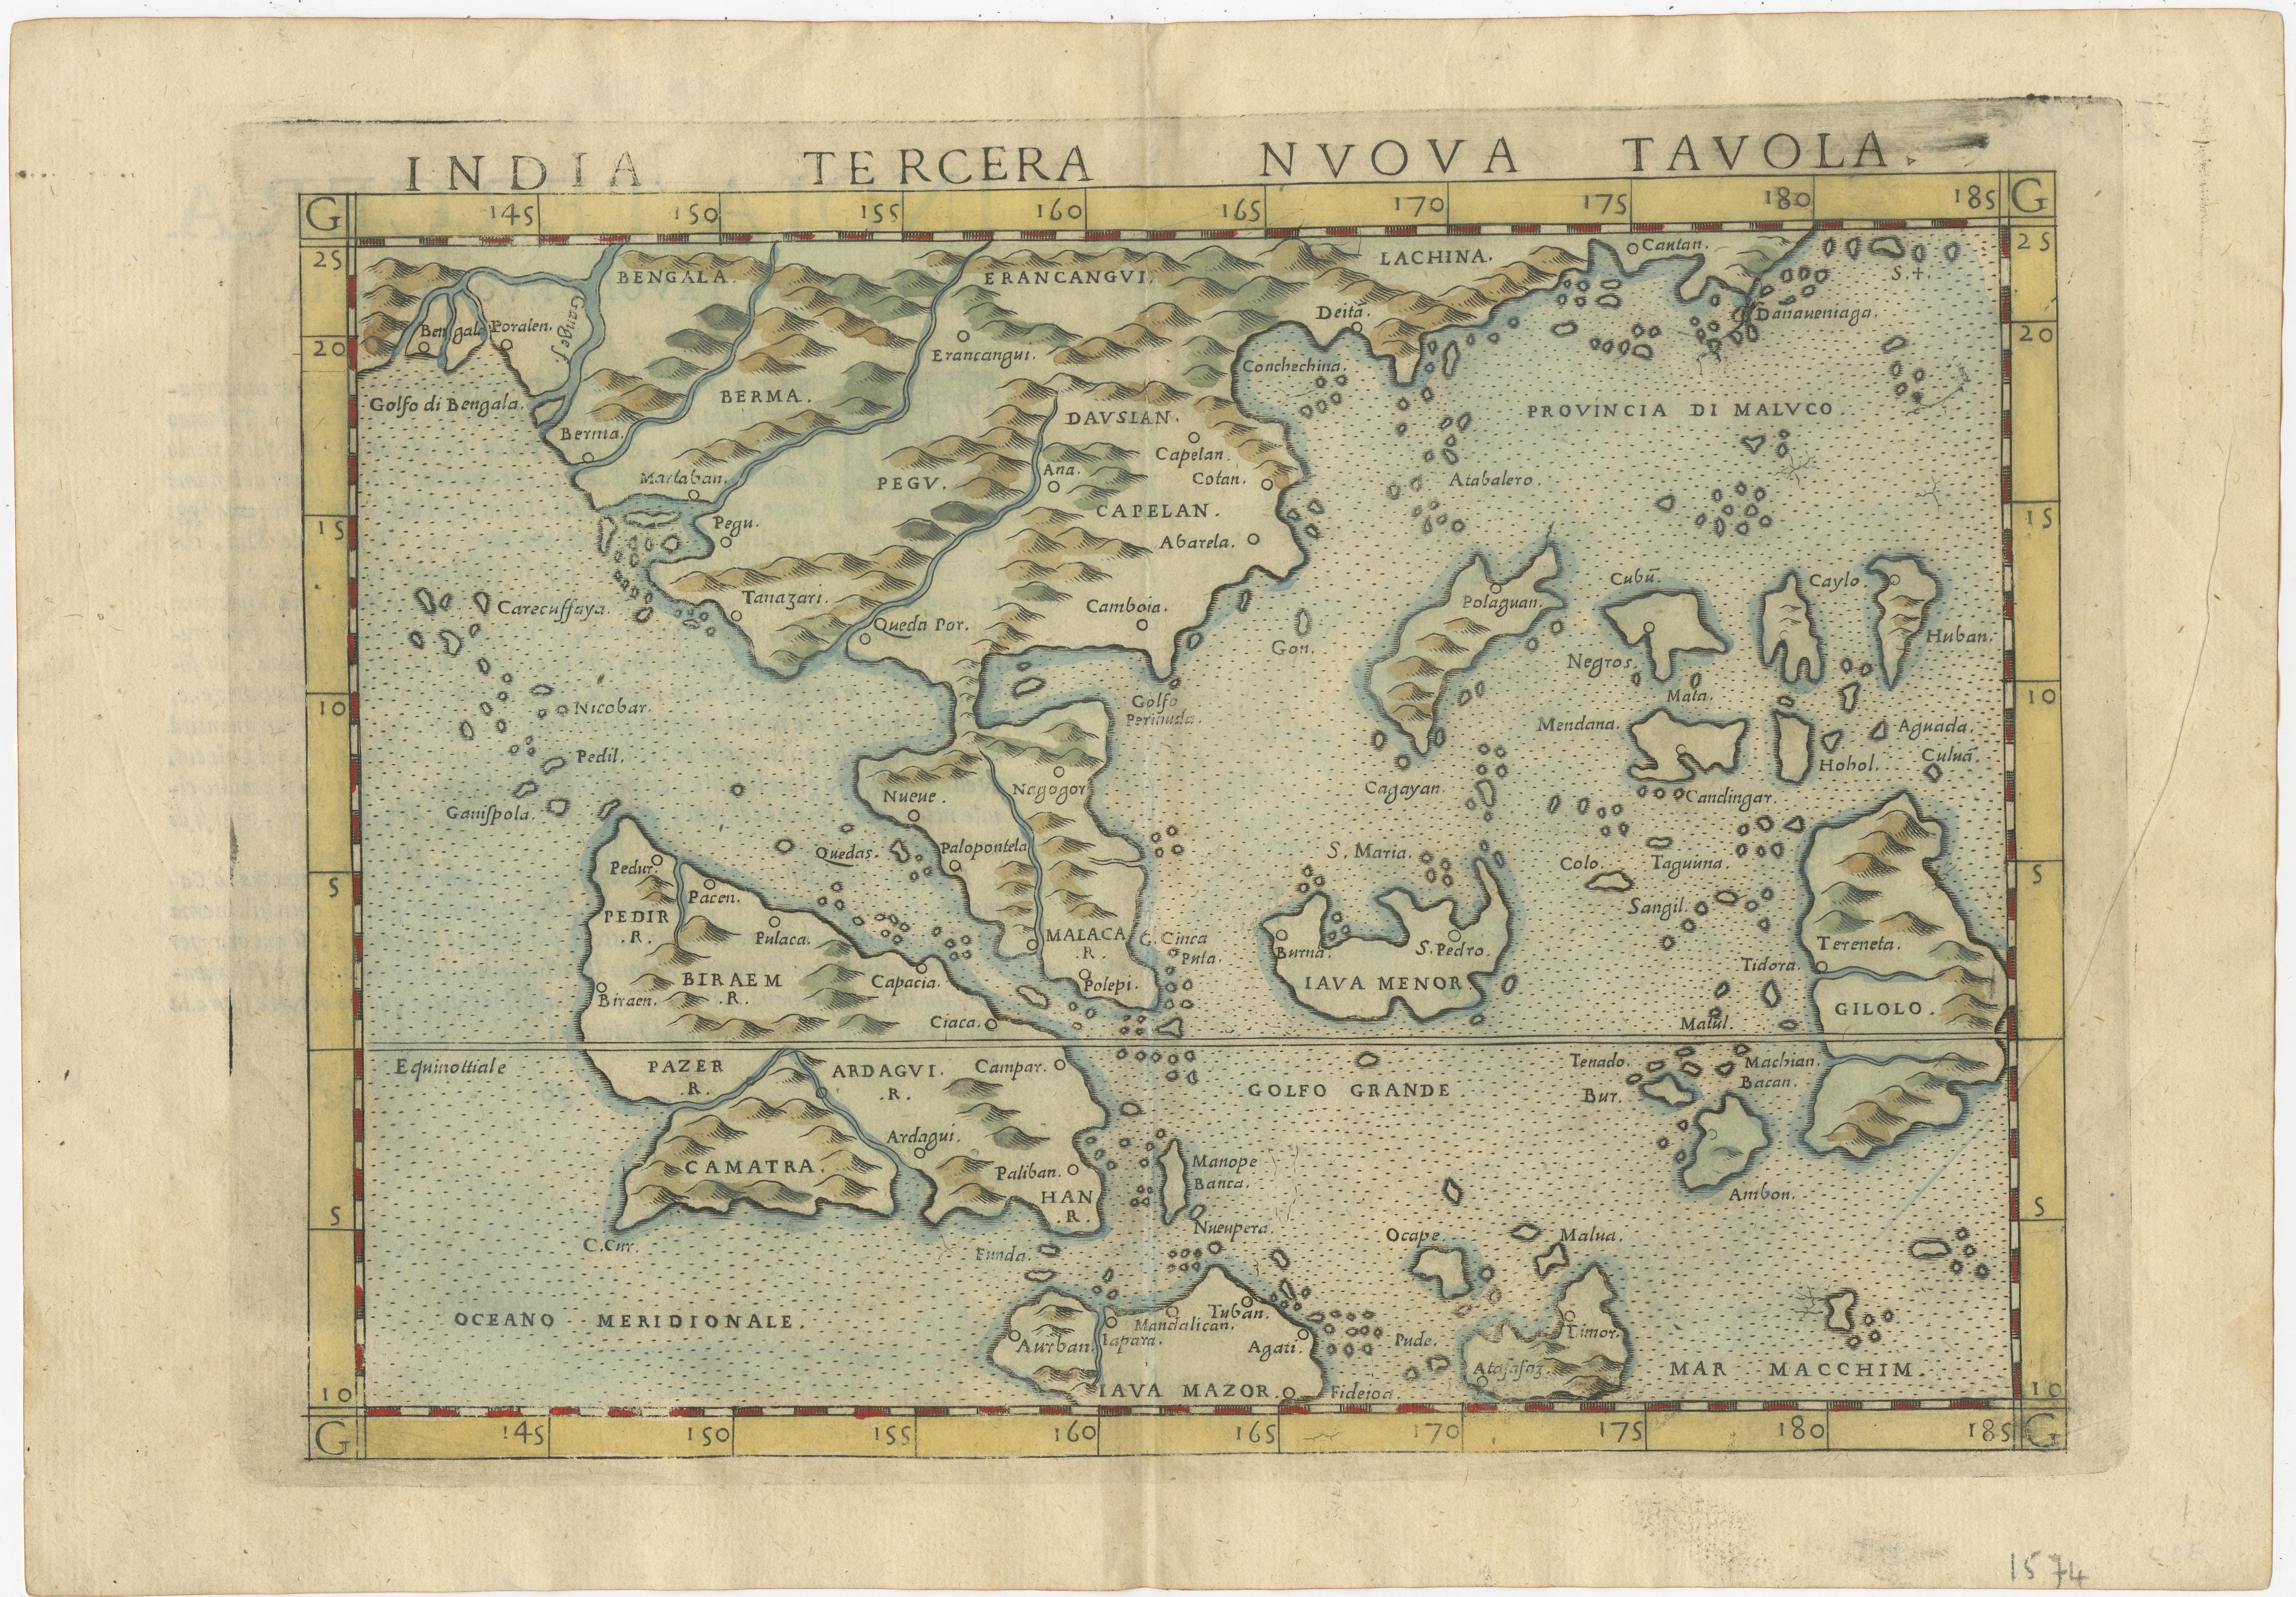 A very fine impression of this map of the Malay Peninsula, Sumatra, Java, with Singapore denoted as 'Cinca Pula'. 

Highly distorted and inaccurate map by Girolamo Ruscelli after Jacopo Gastaldi's 1548 miniature map of this region, that introduced